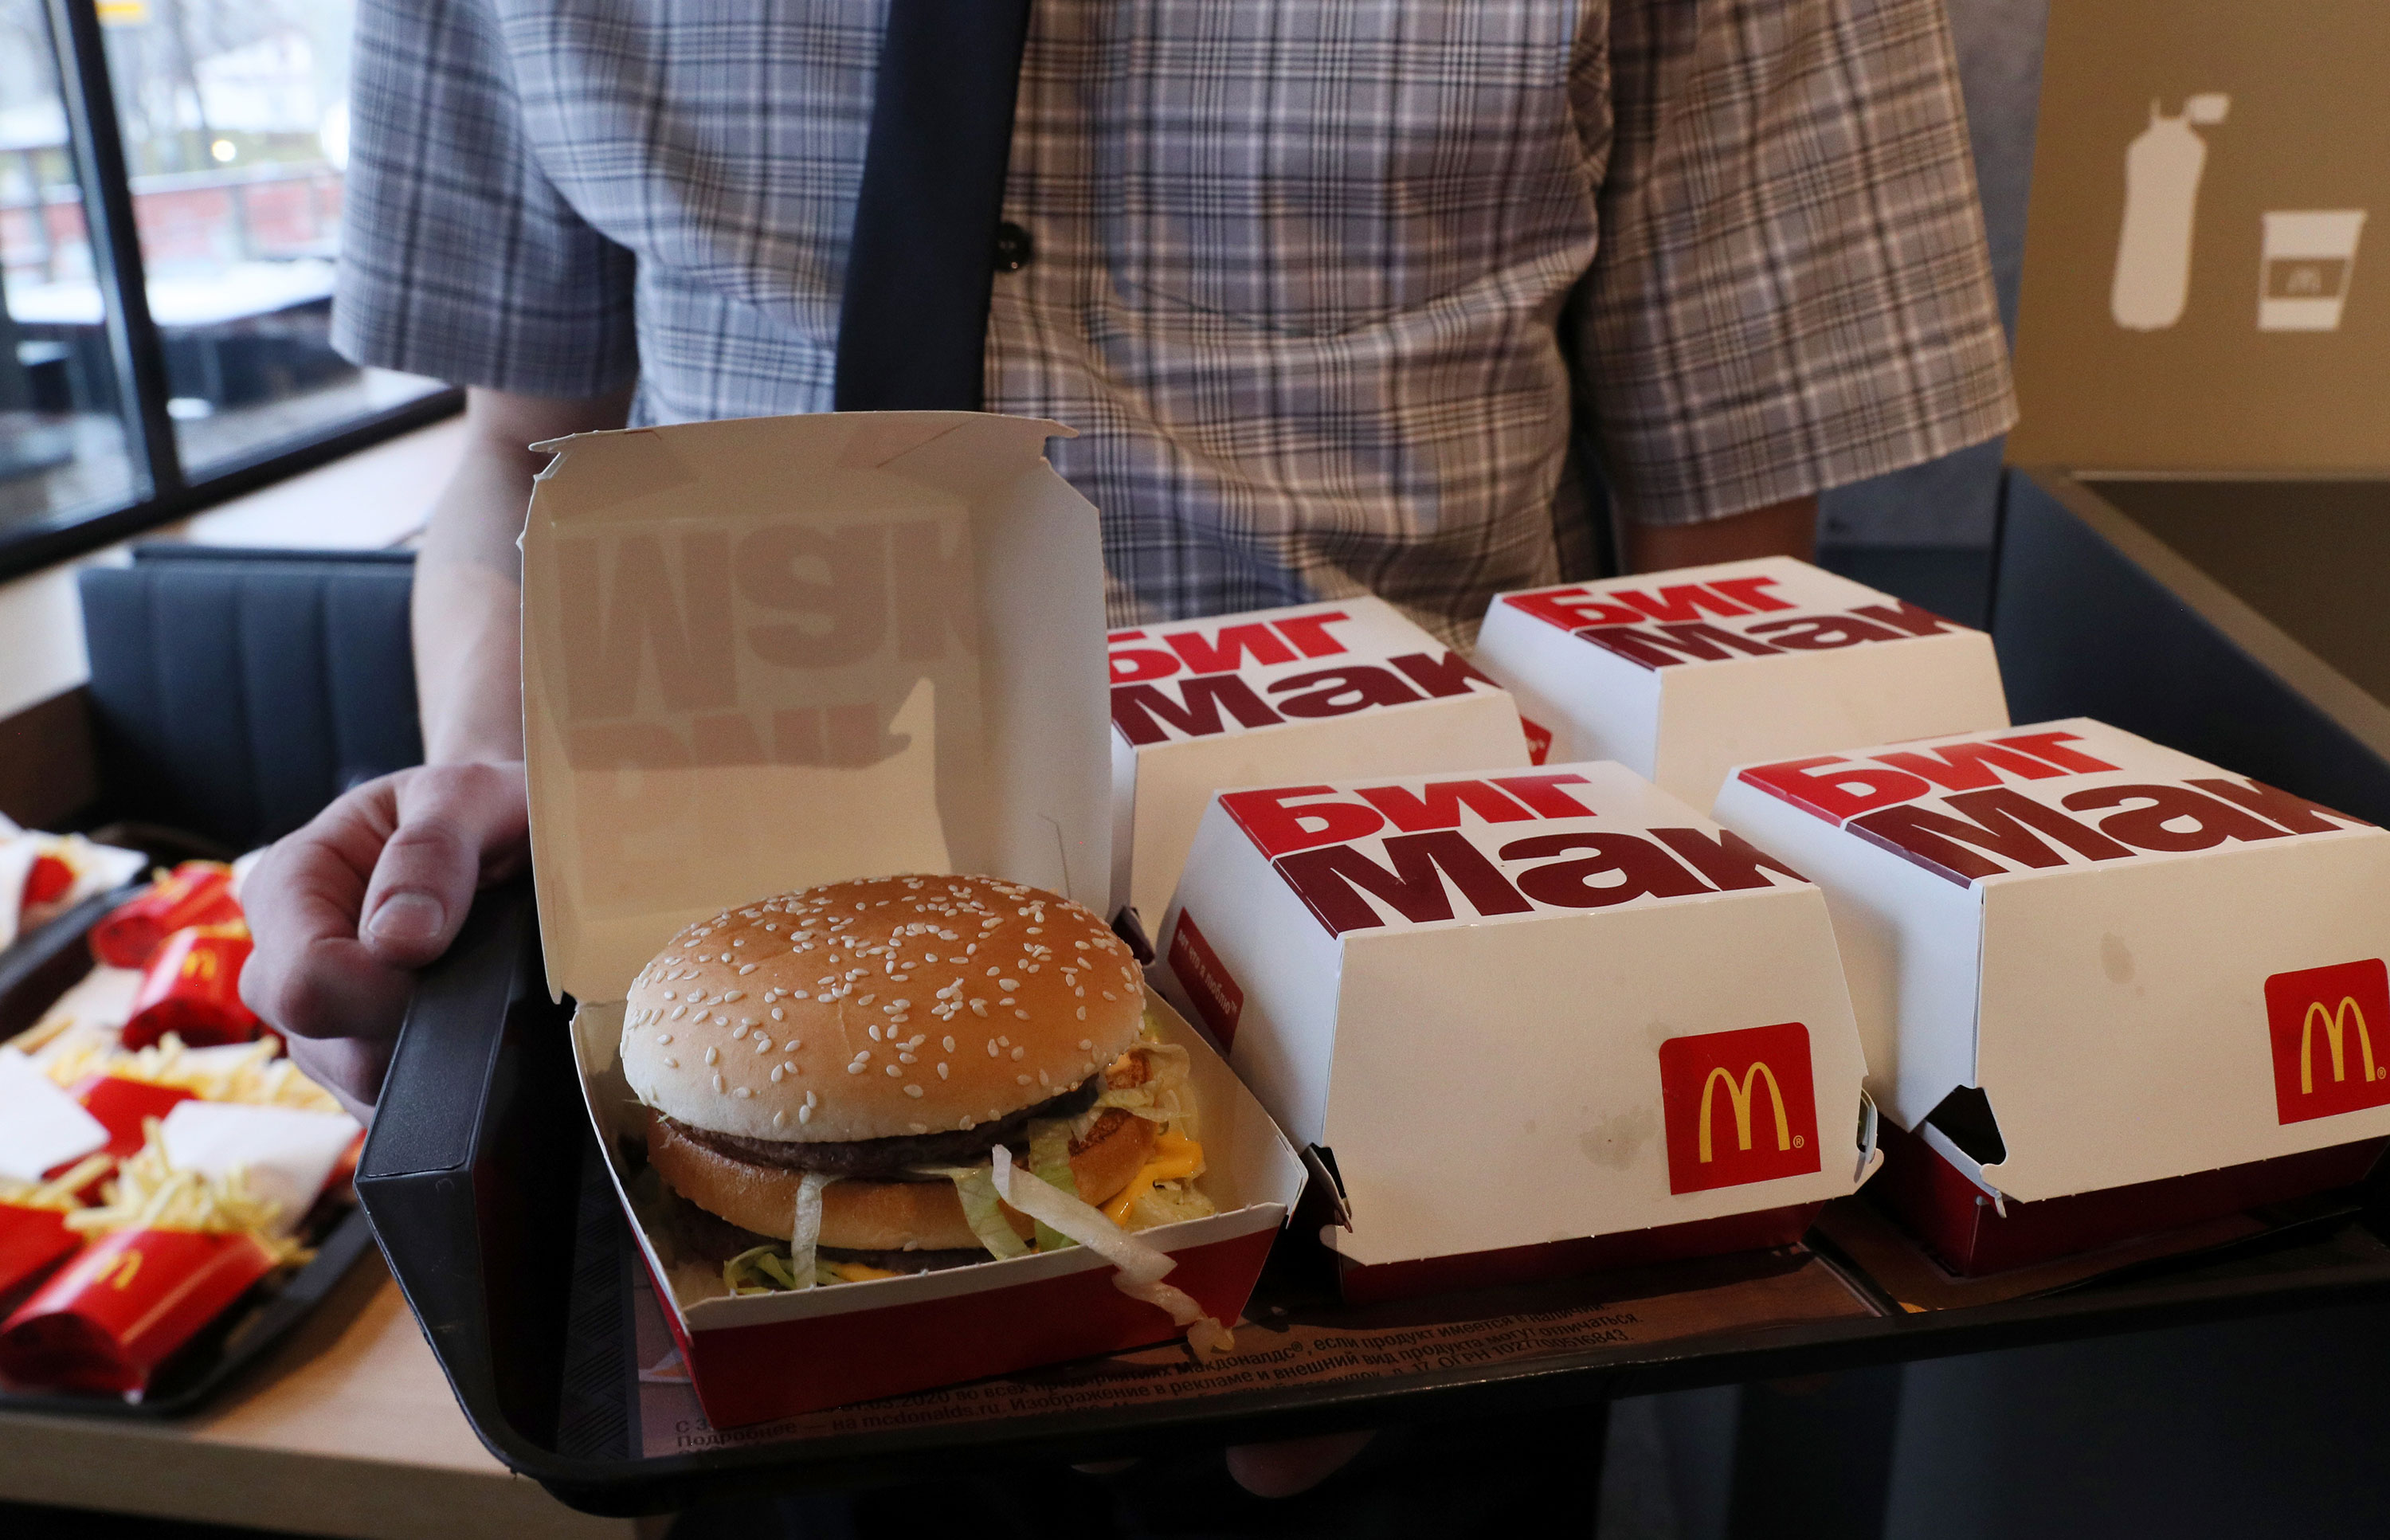 Big Mac hamburgers are seen at a McDonald's restaurant in Pushkin Square in Moscow in 2020.